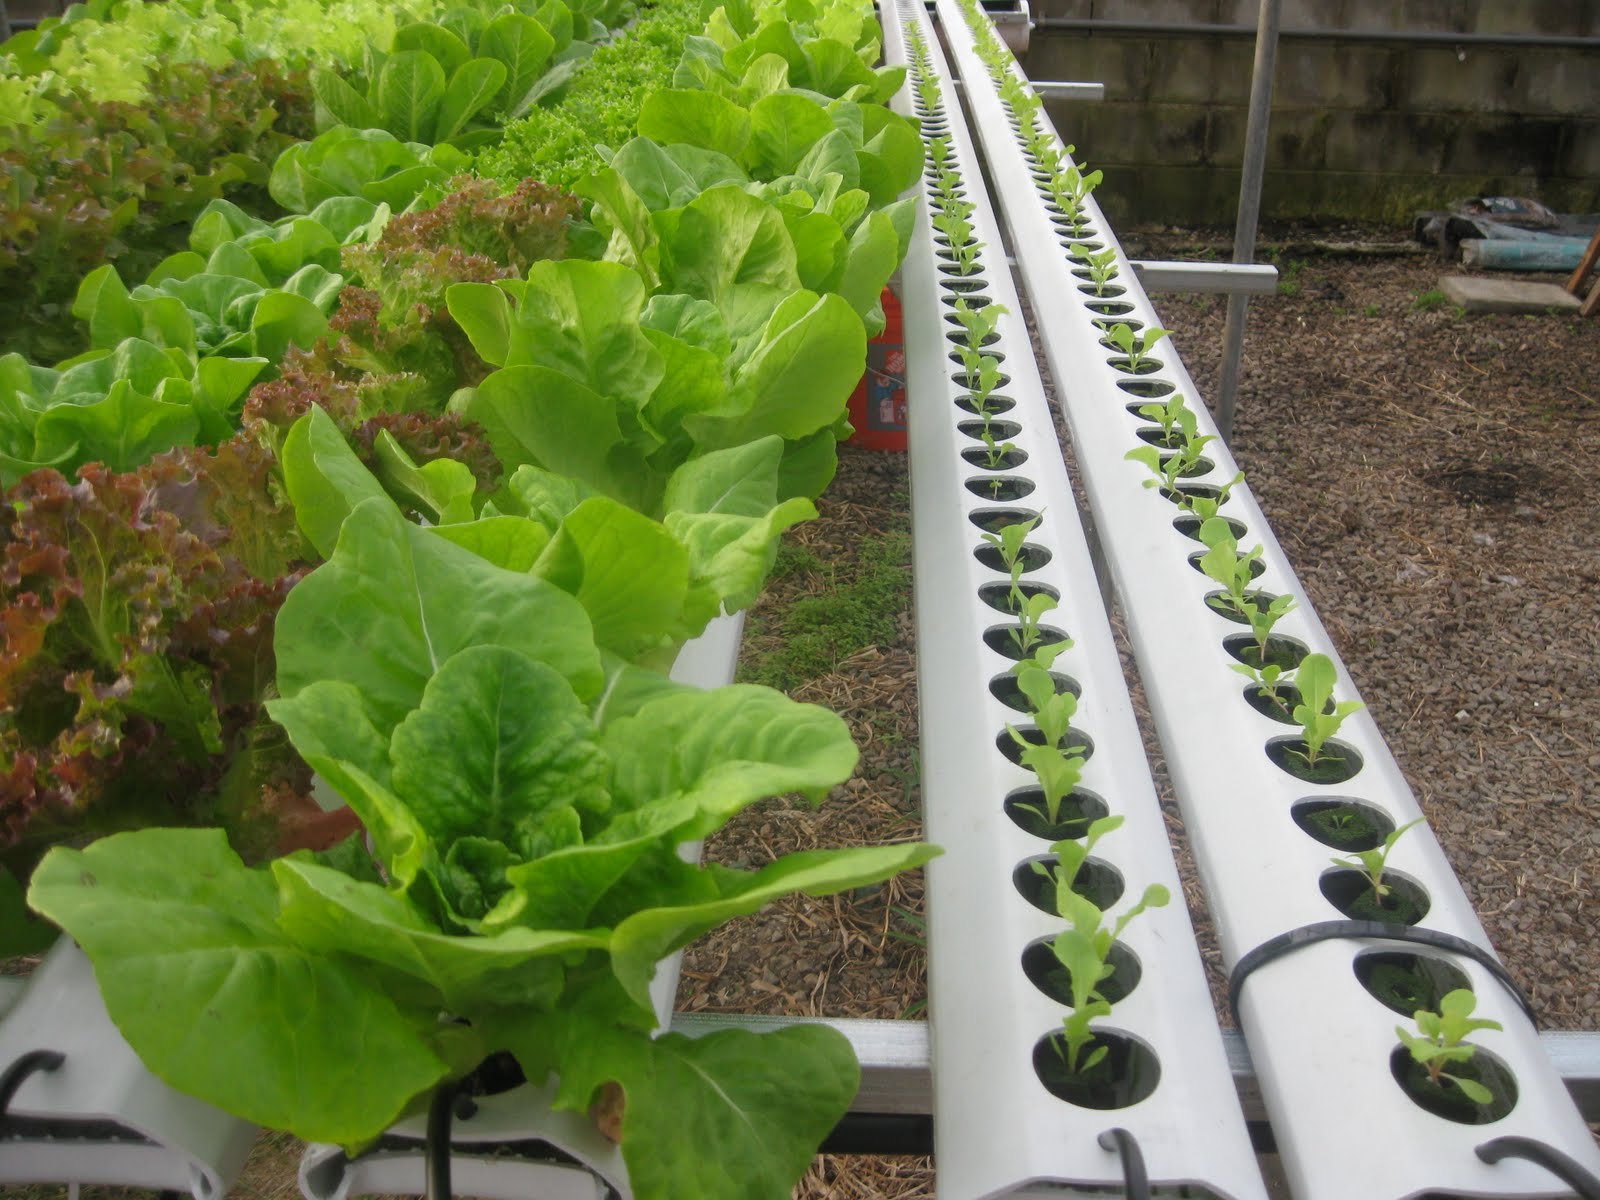 Classic hydroponic cultivation of lettuce without growing medium